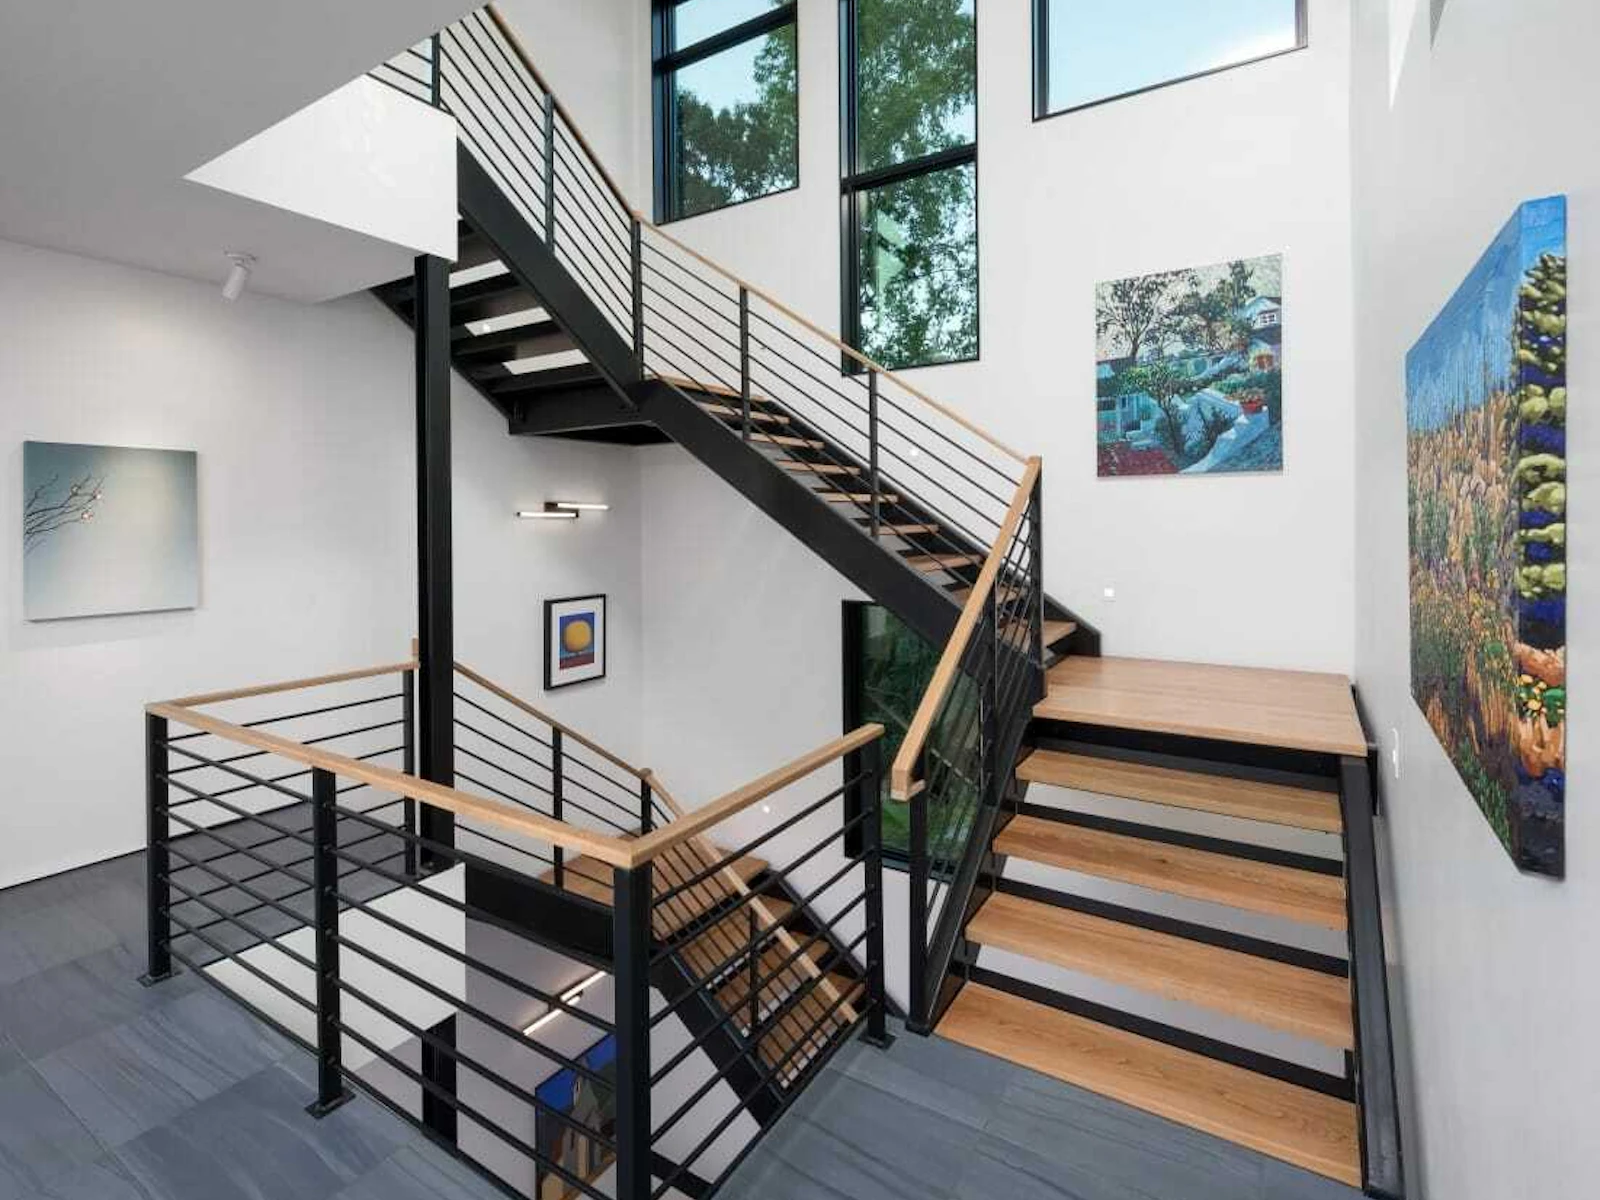 Four-story custom metal staircase